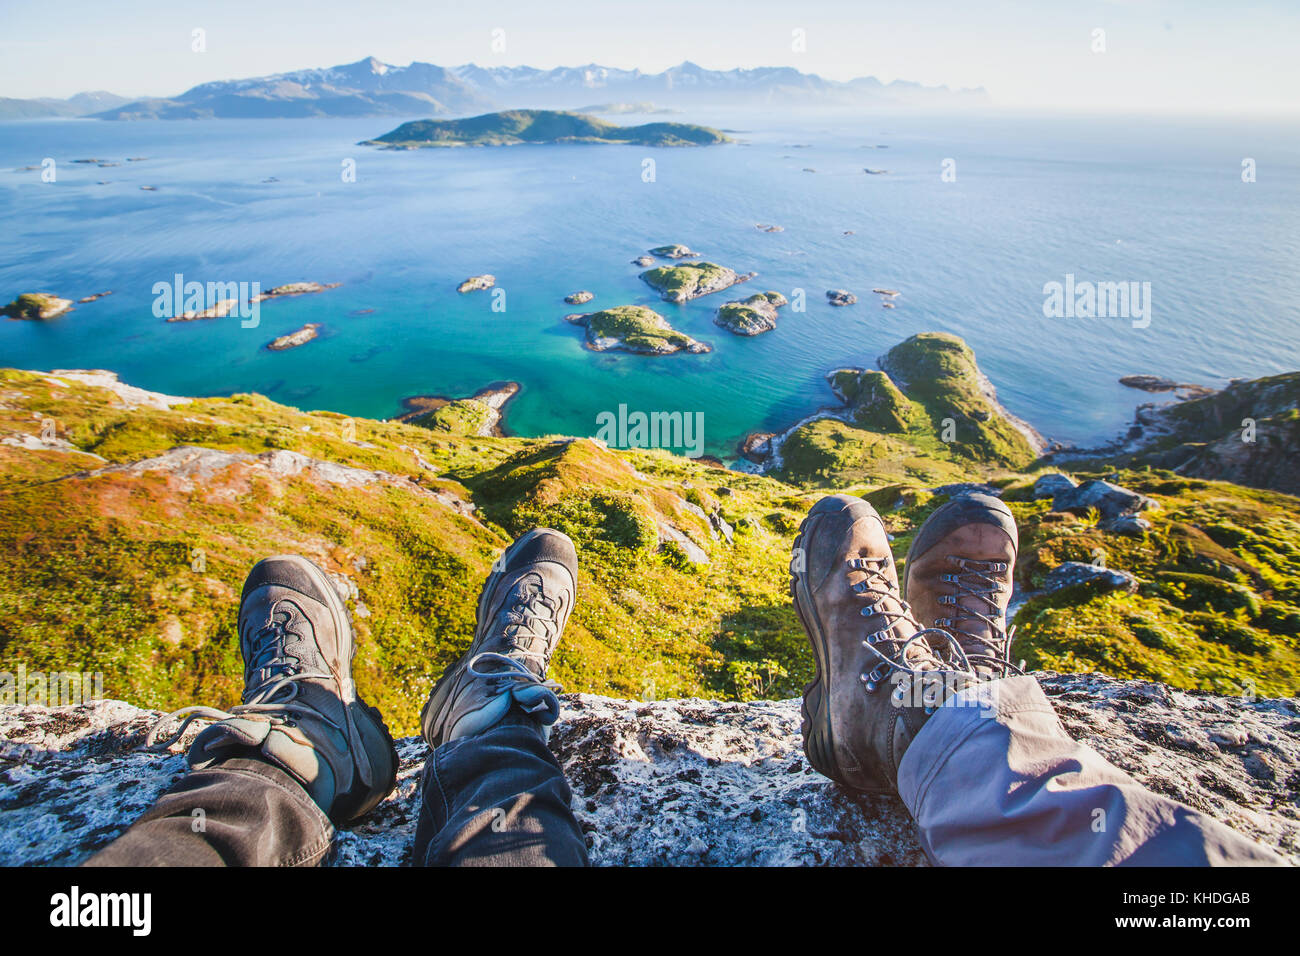 feet of people hikers relaxing on top of the mountain, travel background, hiking shoes Stock Photo